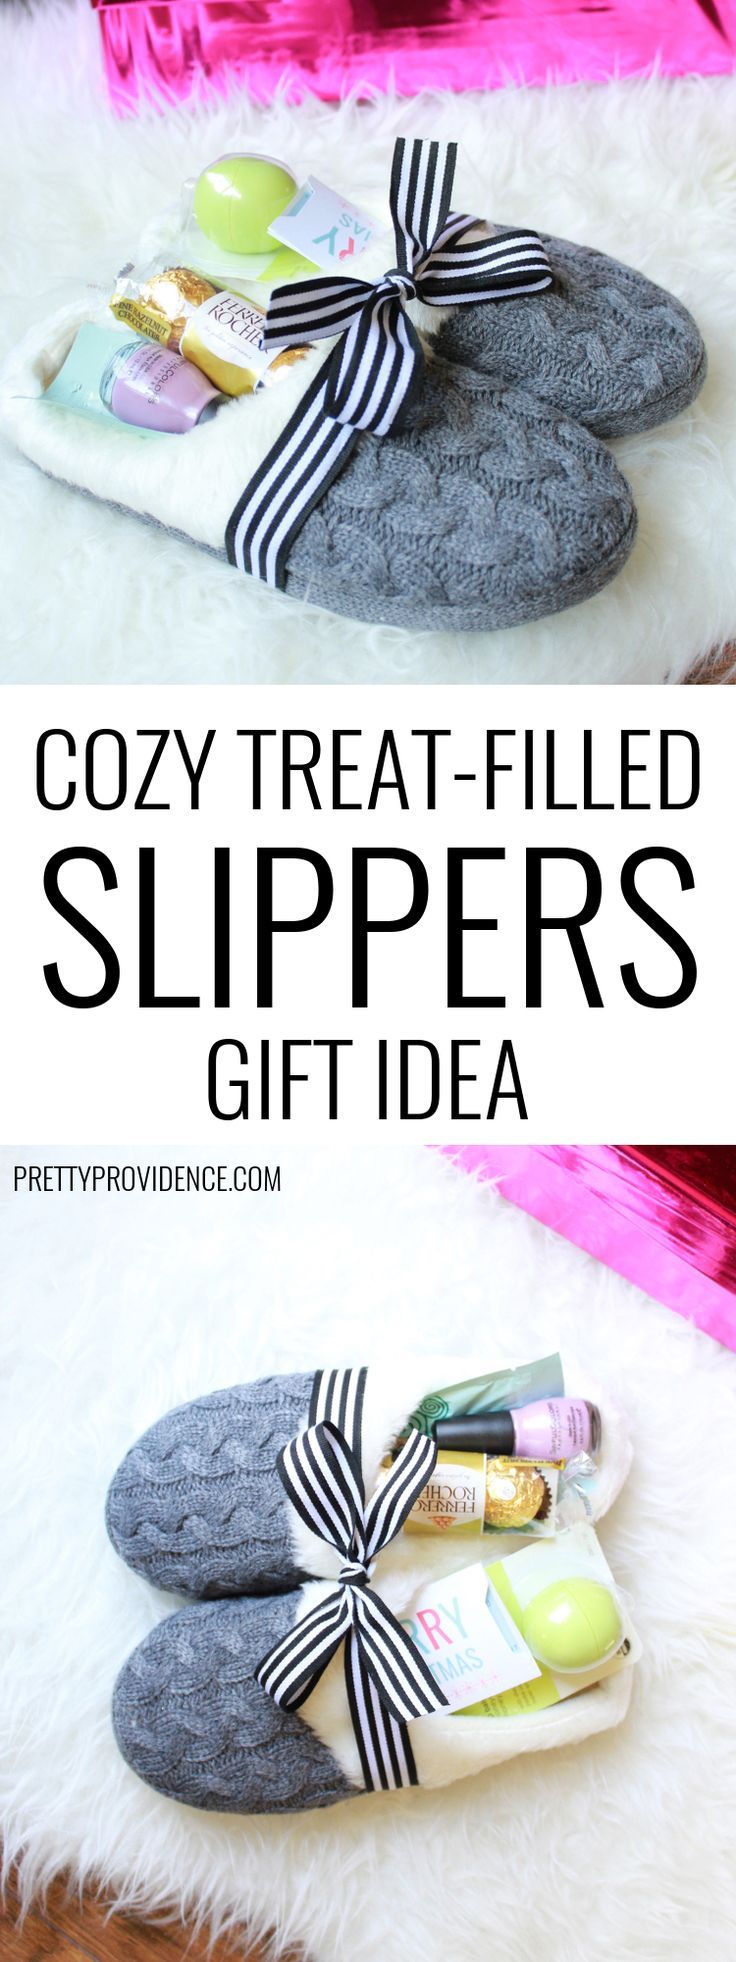 Slippers make a great gift and they are even better when filled with little trea...